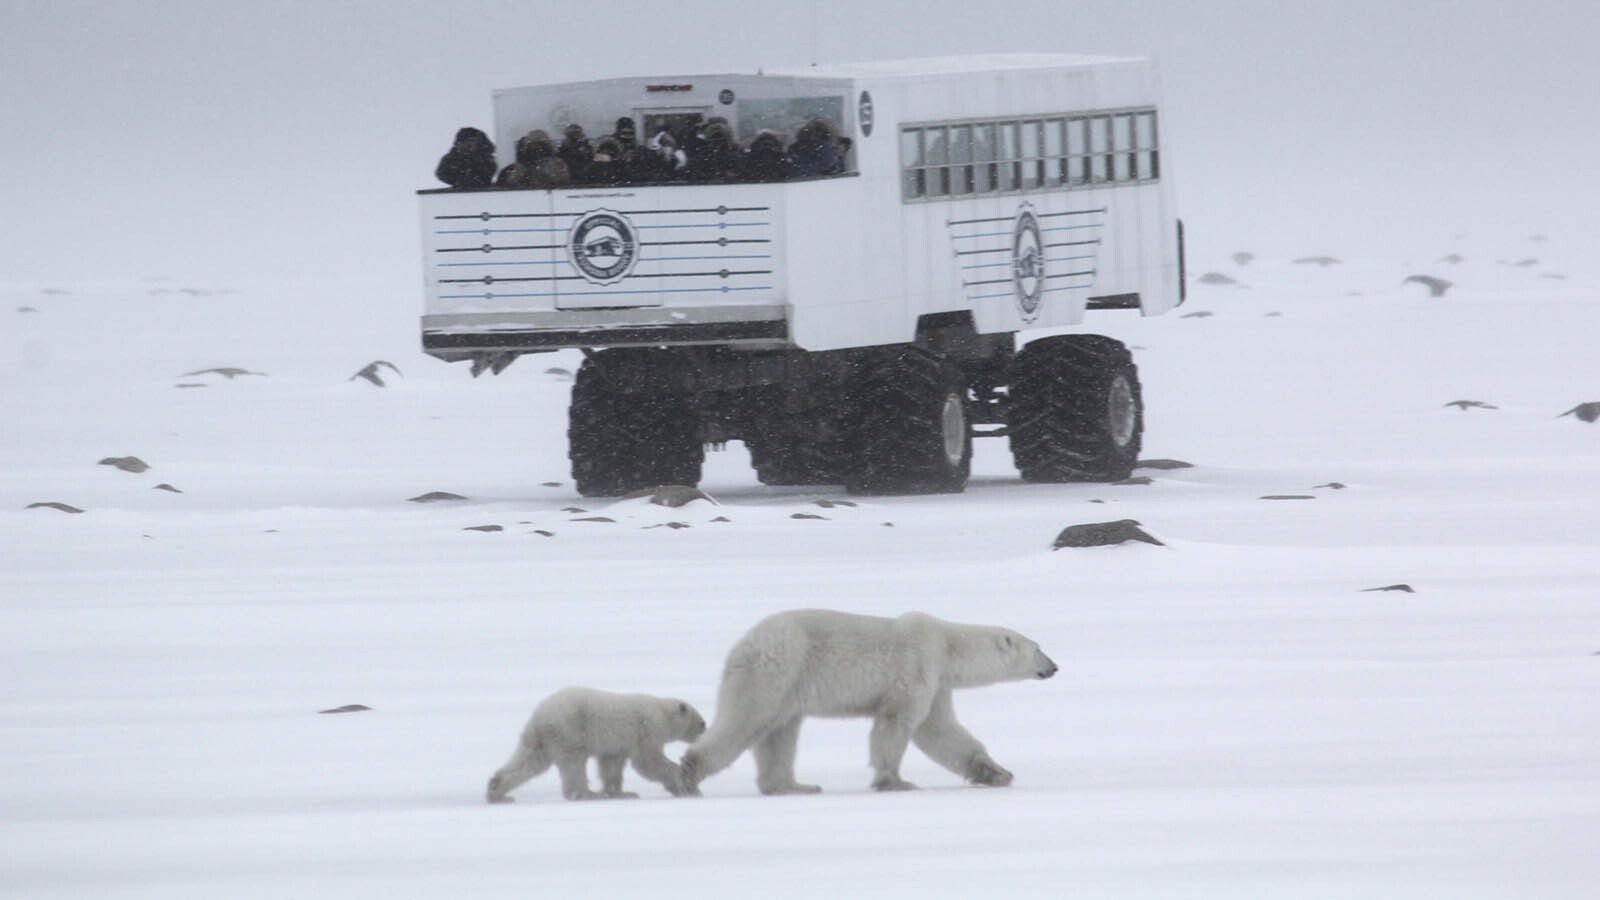 A polar bear sow and her cub seem oblivious to this group of bear watchers.